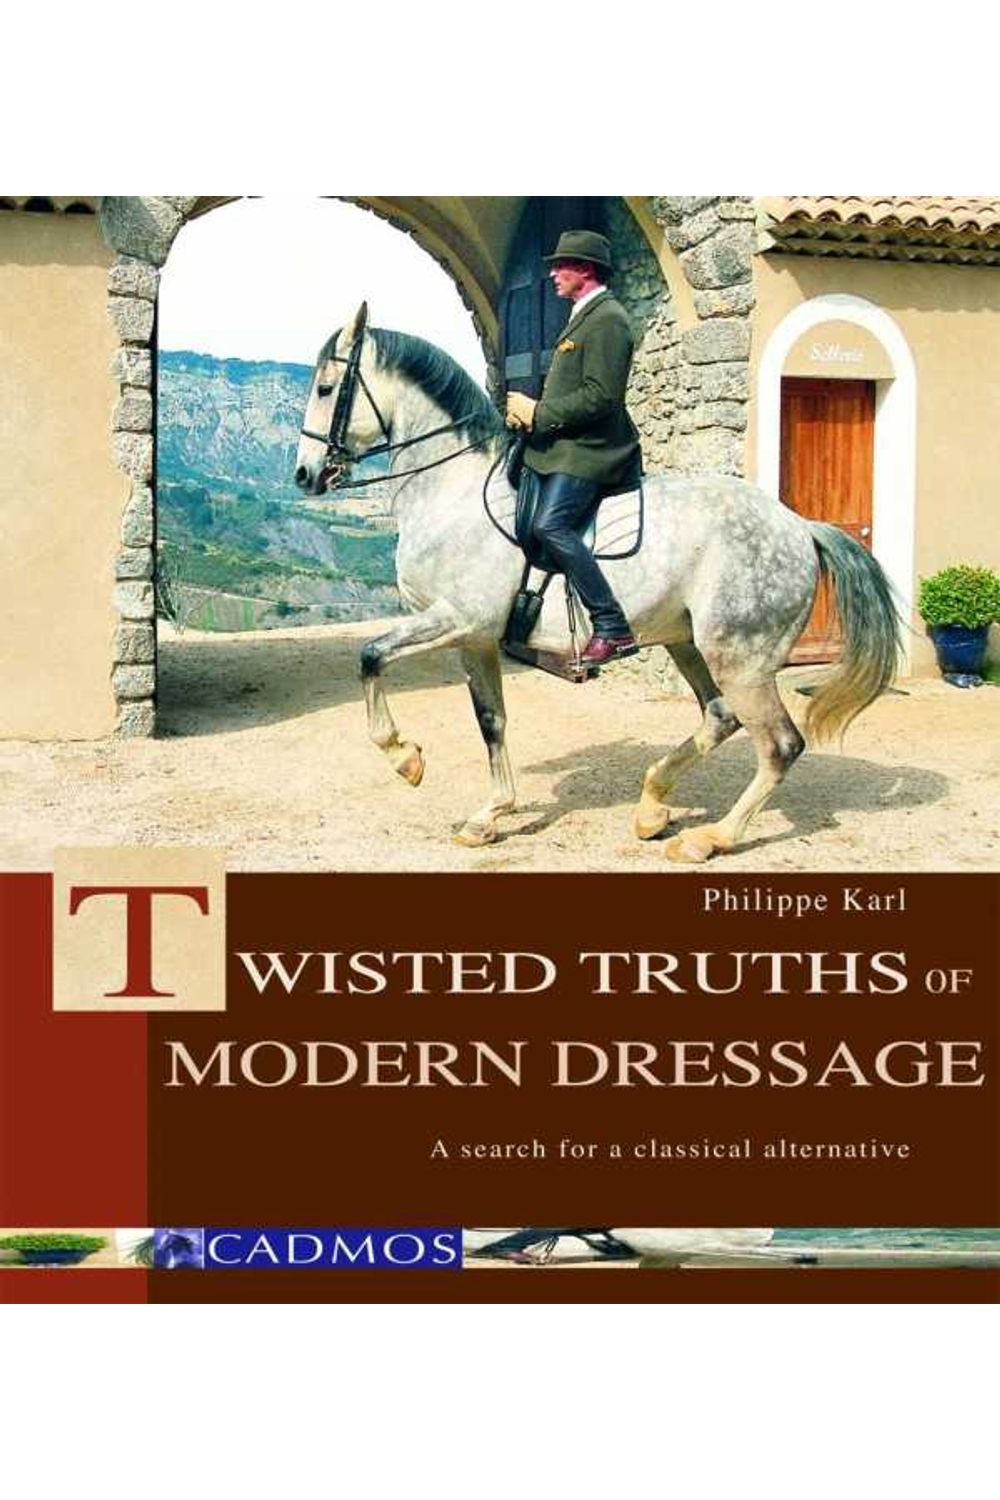 bw-twisted-truths-of-modern-dressage-cadmos-publishing-9780857886767